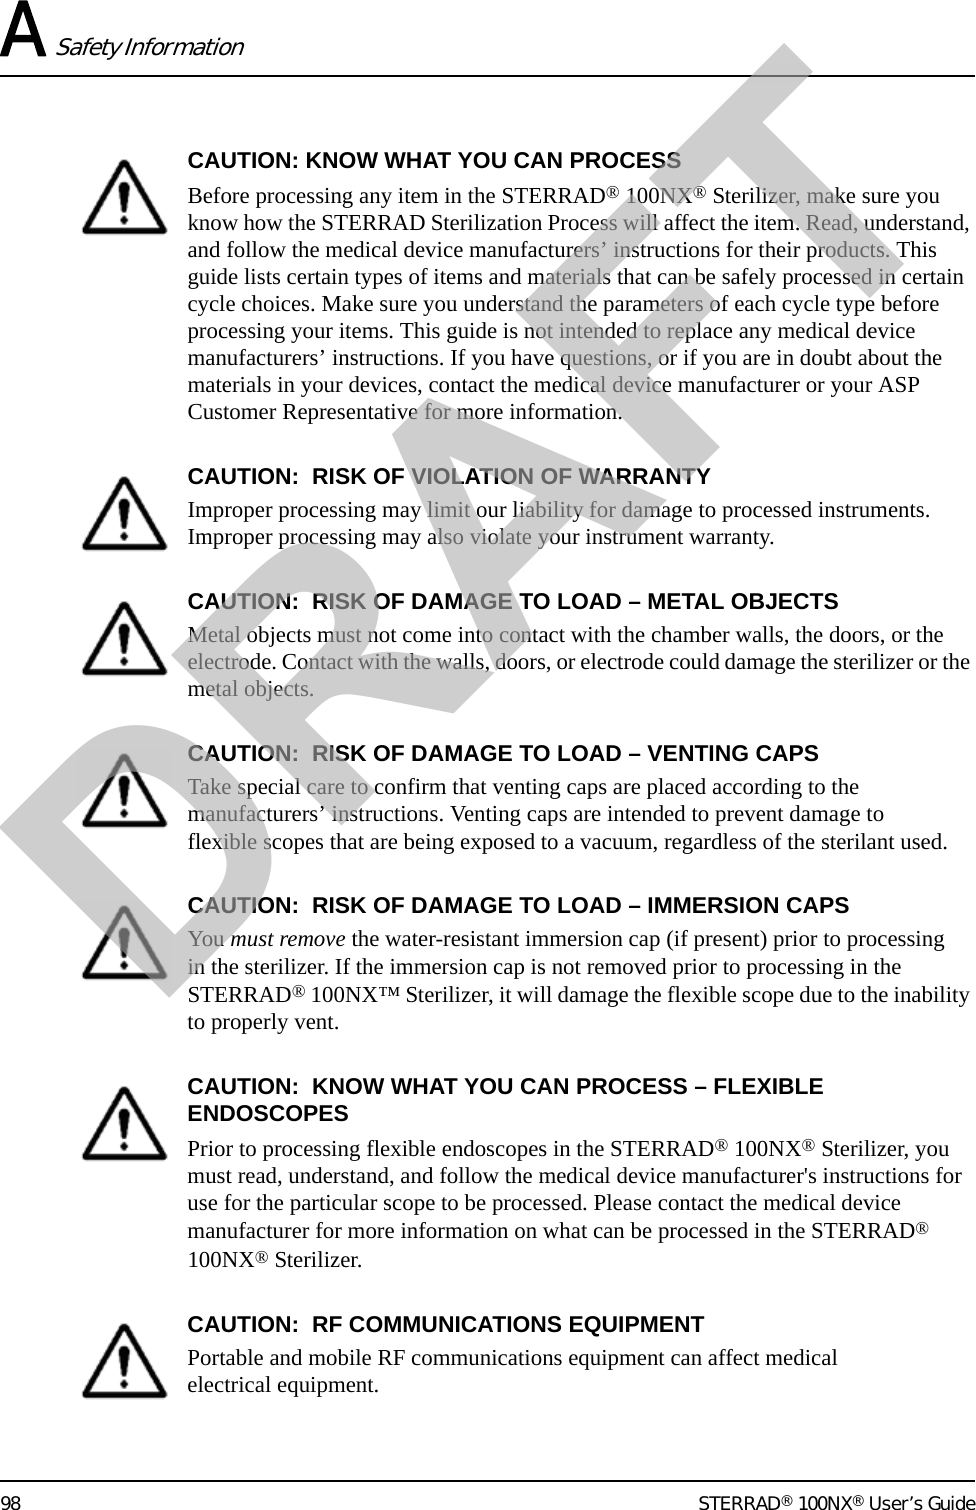 A Safety Information98 STERRAD® 100NX® User’s GuideCAUTION: KNOW WHAT YOU CAN PROCESSBefore processing any item in the STERRAD® 100NX® Sterilizer, make sure you know how the STERRAD Sterilization Process will affect the item. Read, understand, and follow the medical device manufacturers’ instructions for their products. This guide lists certain types of items and materials that can be safely processed in certain cycle choices. Make sure you understand the parameters of each cycle type before processing your items. This guide is not intended to replace any medical device manufacturers’ instructions. If you have questions, or if you are in doubt about the materials in your devices, contact the medical device manufacturer or your ASP Customer Representative for more information.CAUTION:  RISK OF VIOLATION OF WARRANTYImproper processing may limit our liability for damage to processed instruments. Improper processing may also violate your instrument warranty.CAUTION:  RISK OF DAMAGE TO LOAD – METAL OBJECTSMetal objects must not come into contact with the chamber walls, the doors, or the electrode. Contact with the walls, doors, or electrode could damage the sterilizer or the metal objects.CAUTION:  RISK OF DAMAGE TO LOAD – VENTING CAPSTake special care to confirm that venting caps are placed according to the manufacturers’ instructions. Venting caps are intended to prevent damage to flexible scopes that are being exposed to a vacuum, regardless of the sterilant used.CAUTION:  RISK OF DAMAGE TO LOAD – IMMERSION CAPSYou must remove the water-resistant immersion cap (if present) prior to processing in the sterilizer. If the immersion cap is not removed prior to processing in the STERRAD® 100NX™ Sterilizer, it will damage the flexible scope due to the inability to properly vent. CAUTION:  KNOW WHAT YOU CAN PROCESS – FLEXIBLE ENDOSCOPESPrior to processing flexible endoscopes in the STERRAD® 100NX® Sterilizer, you must read, understand, and follow the medical device manufacturer&apos;s instructions for use for the particular scope to be processed. Please contact the medical device manufacturer for more information on what can be processed in the STERRAD® 100NX® Sterilizer.CAUTION:  RF COMMUNICATIONS EQUIPMENTPortable and mobile RF communications equipment can affect medical electrical equipment.DRAFT